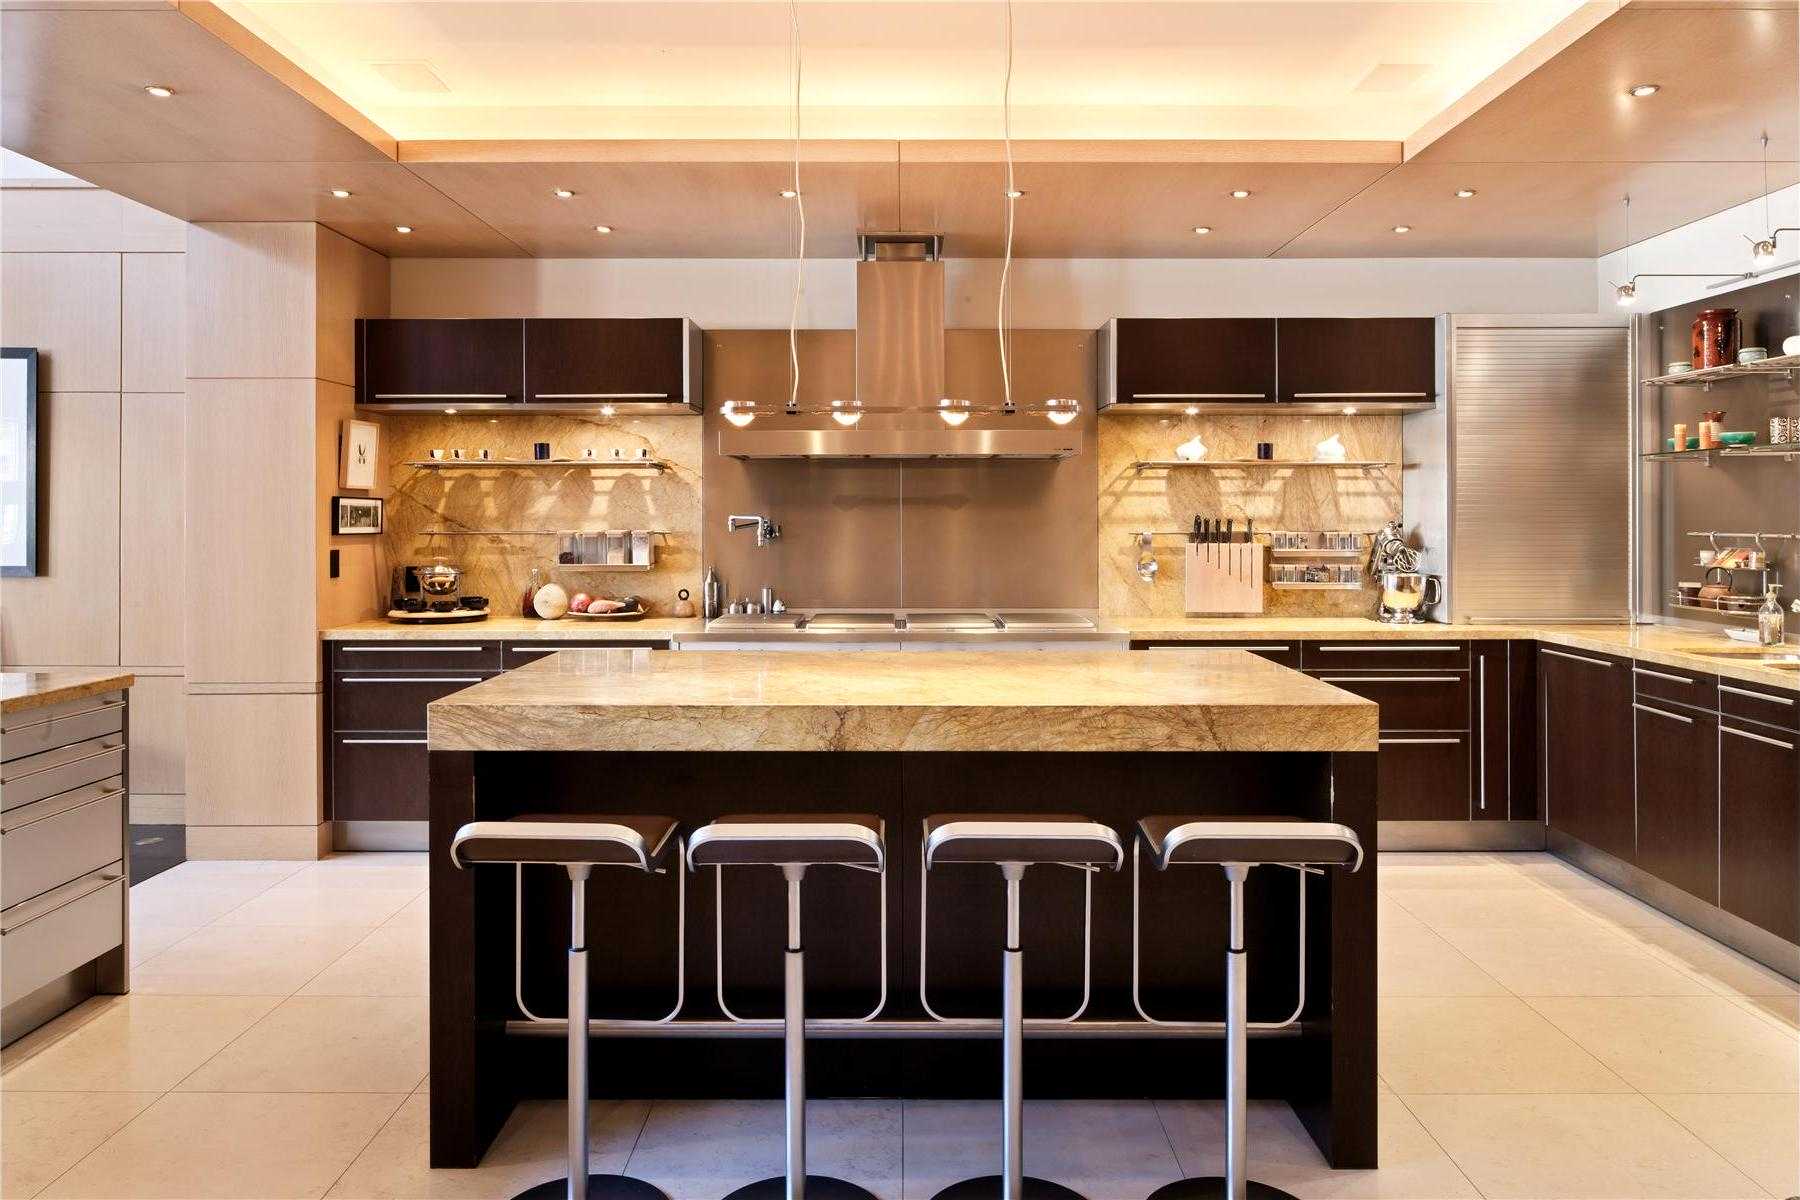 19 Fascinating Dream Kitchen Designs For Every Taste